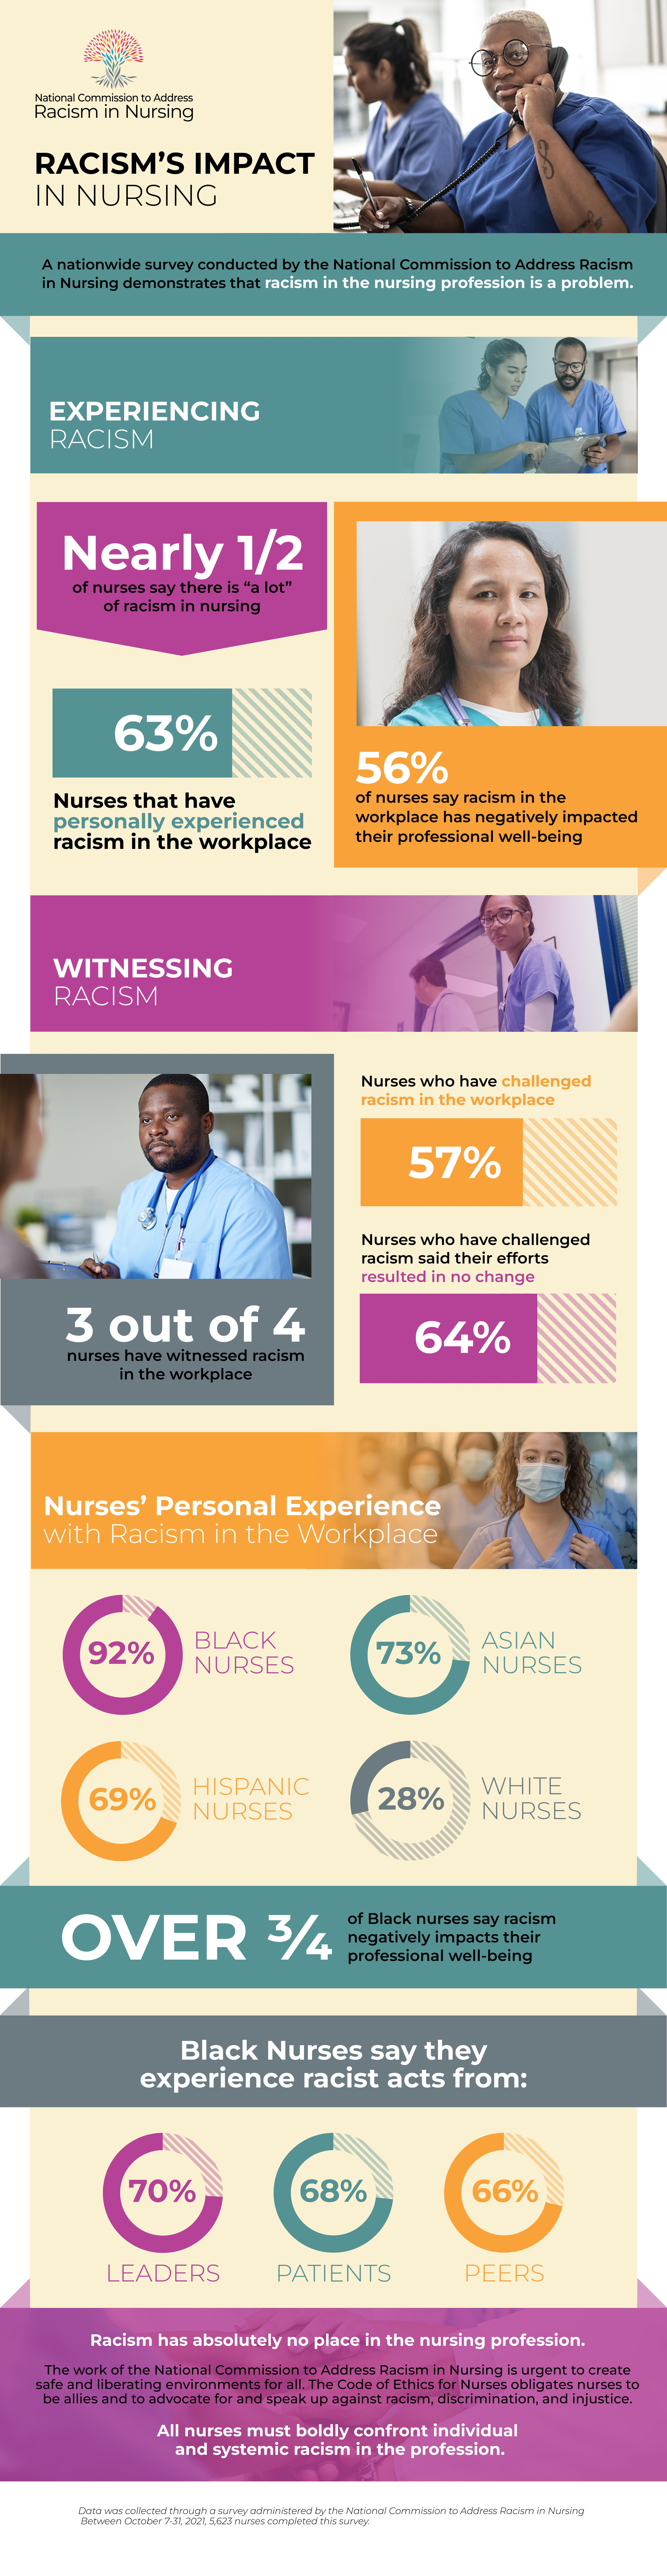 ANA Survey Shows Substantial Racism in Nursing